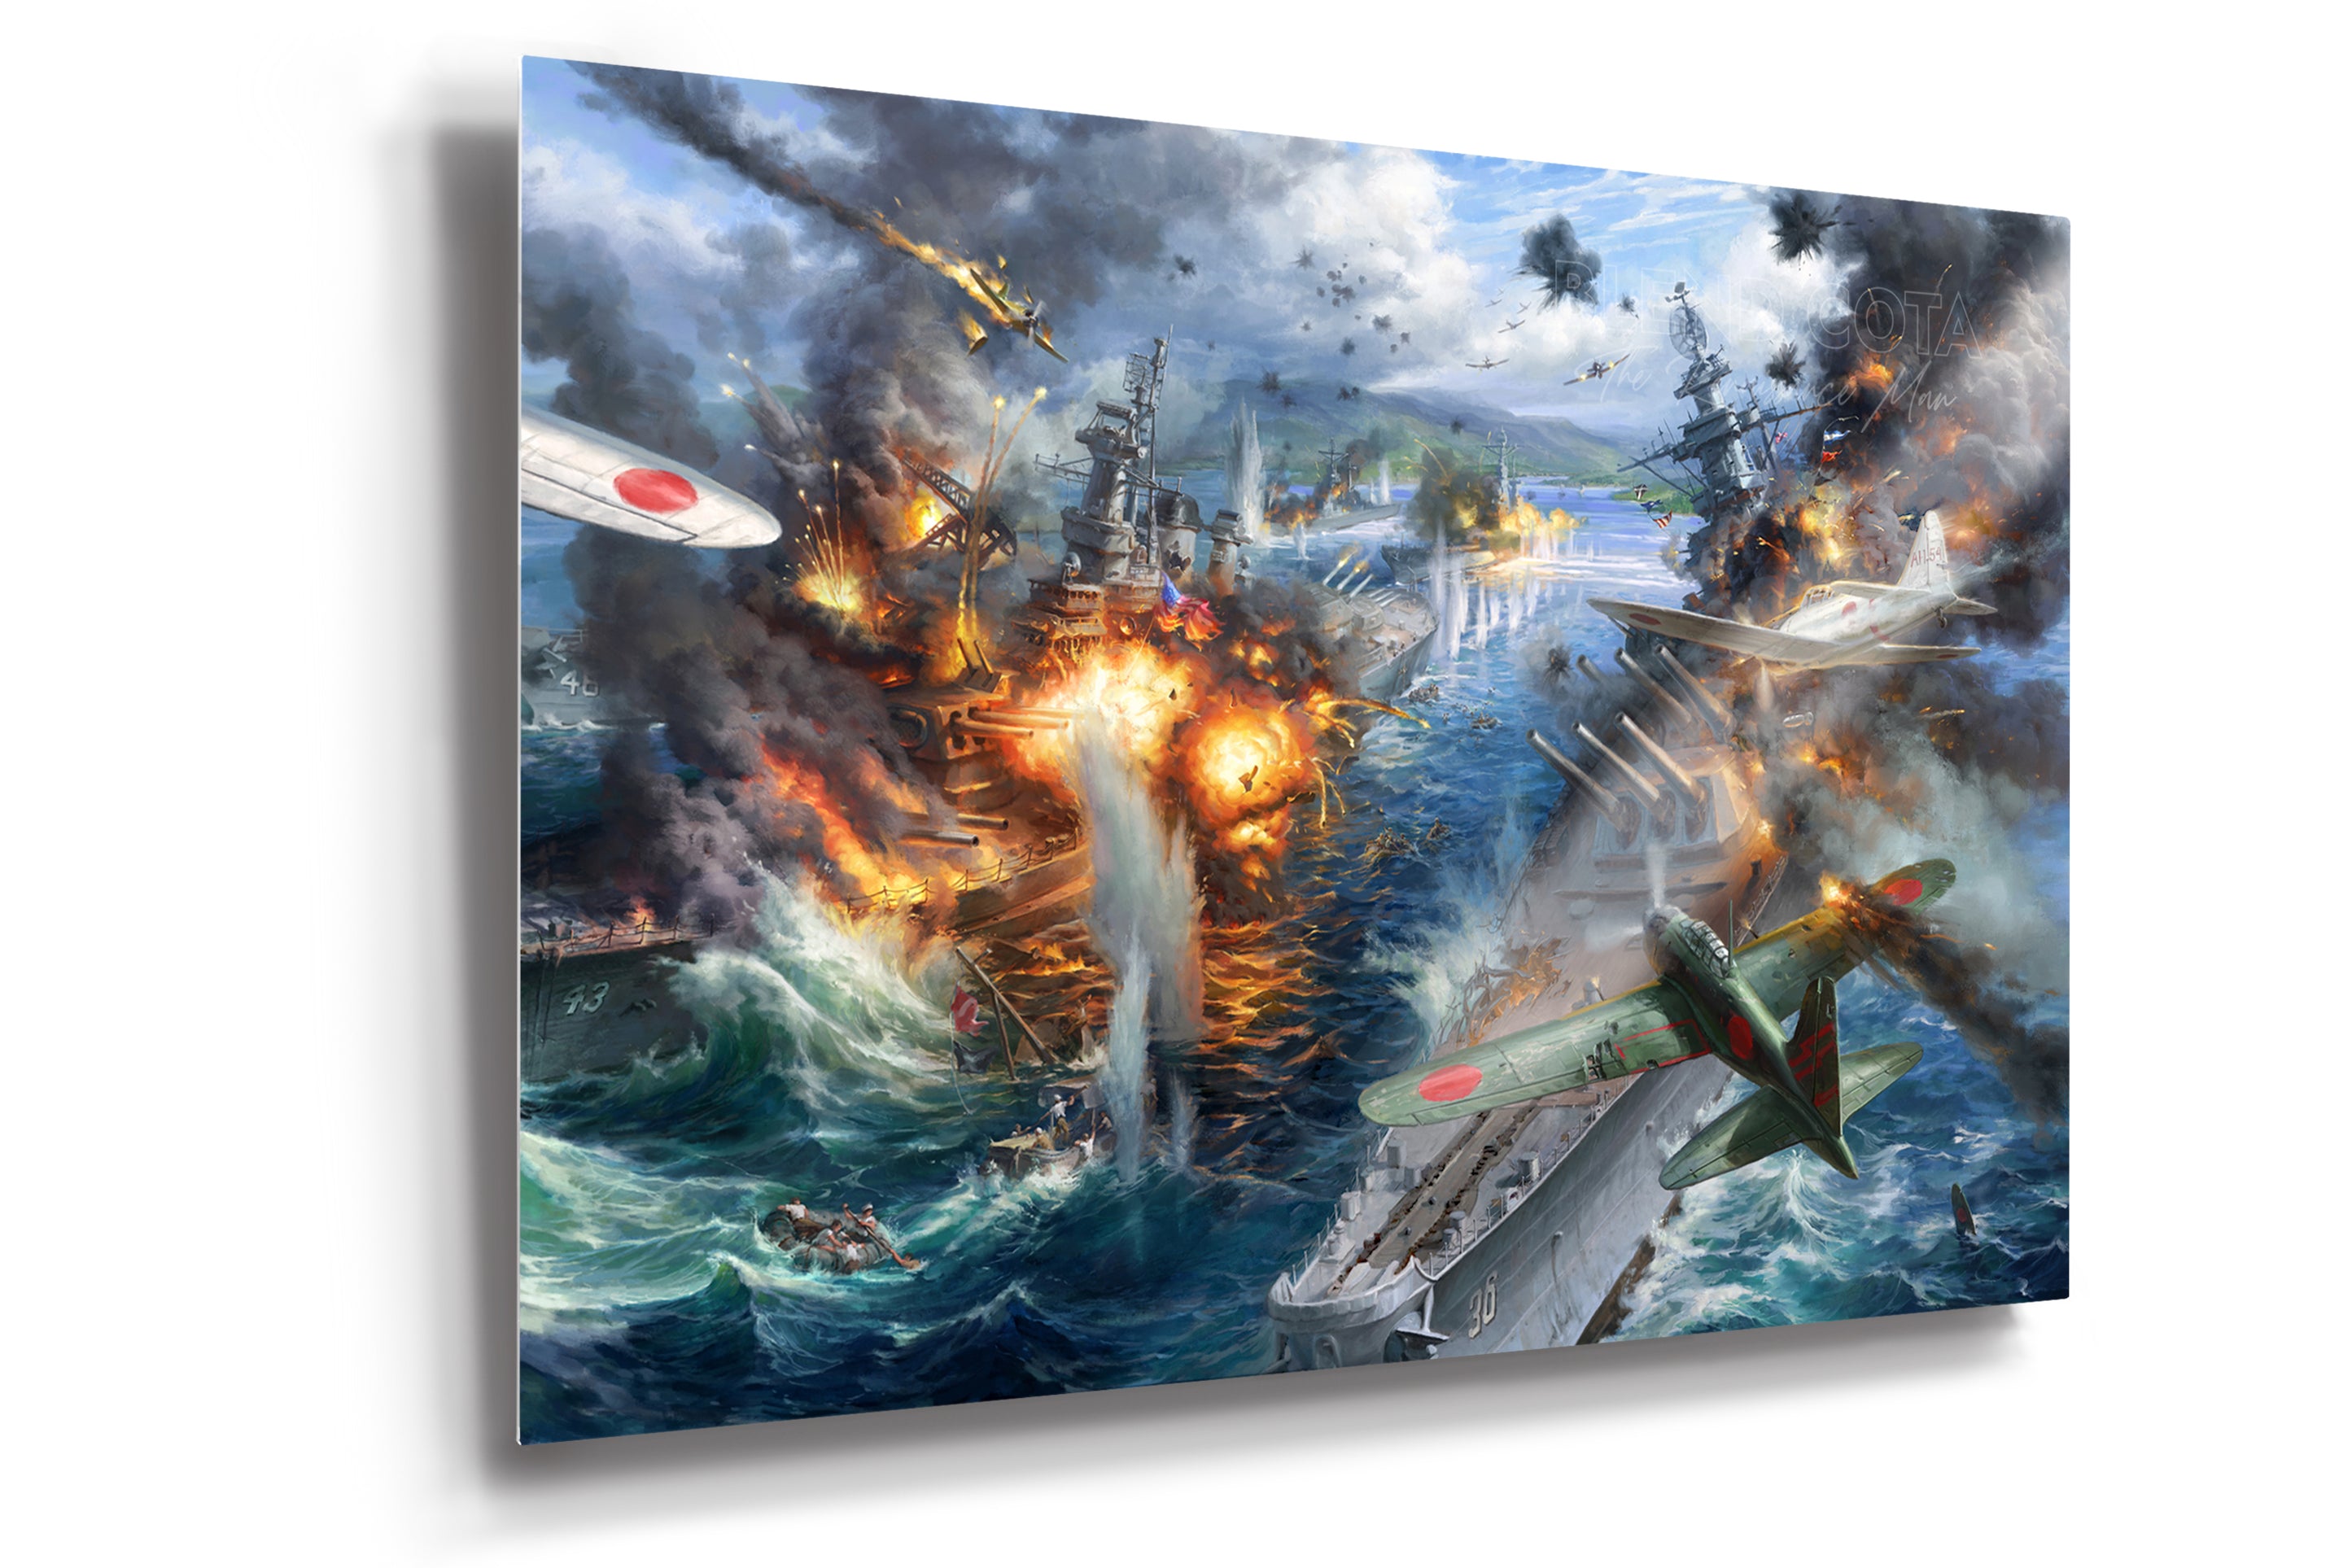 Limited edition on metal of the attack on Pearl Harbor, Japanese planes bombing American battleships, on a background of destruction, smoke and fire, realism style with detailed brushstrokes.